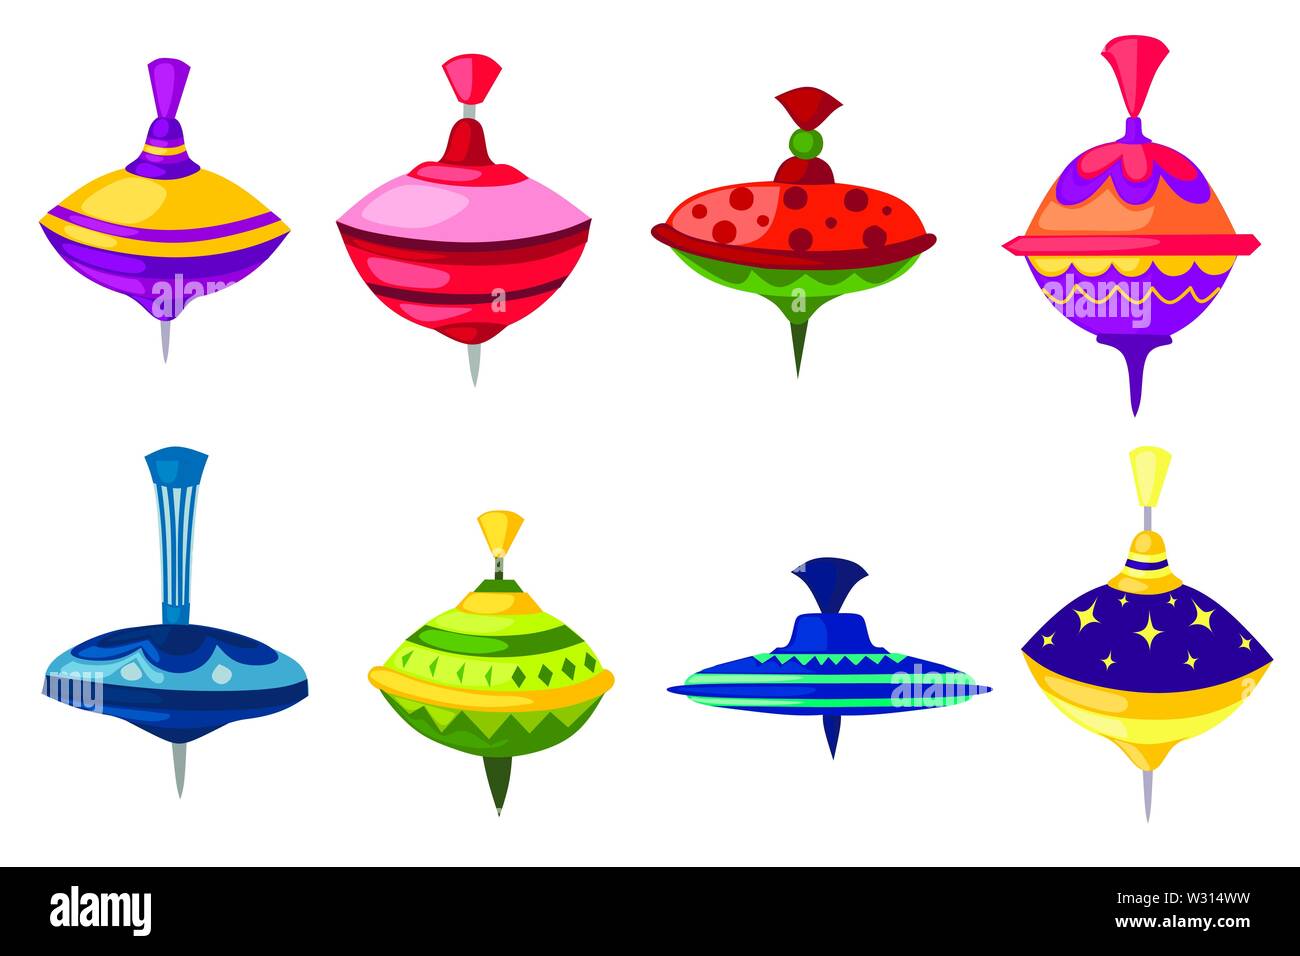 Set of kids toy whirligig spinner with different form and texture patterns flat vector illustration isolated on white background. Stock Vector